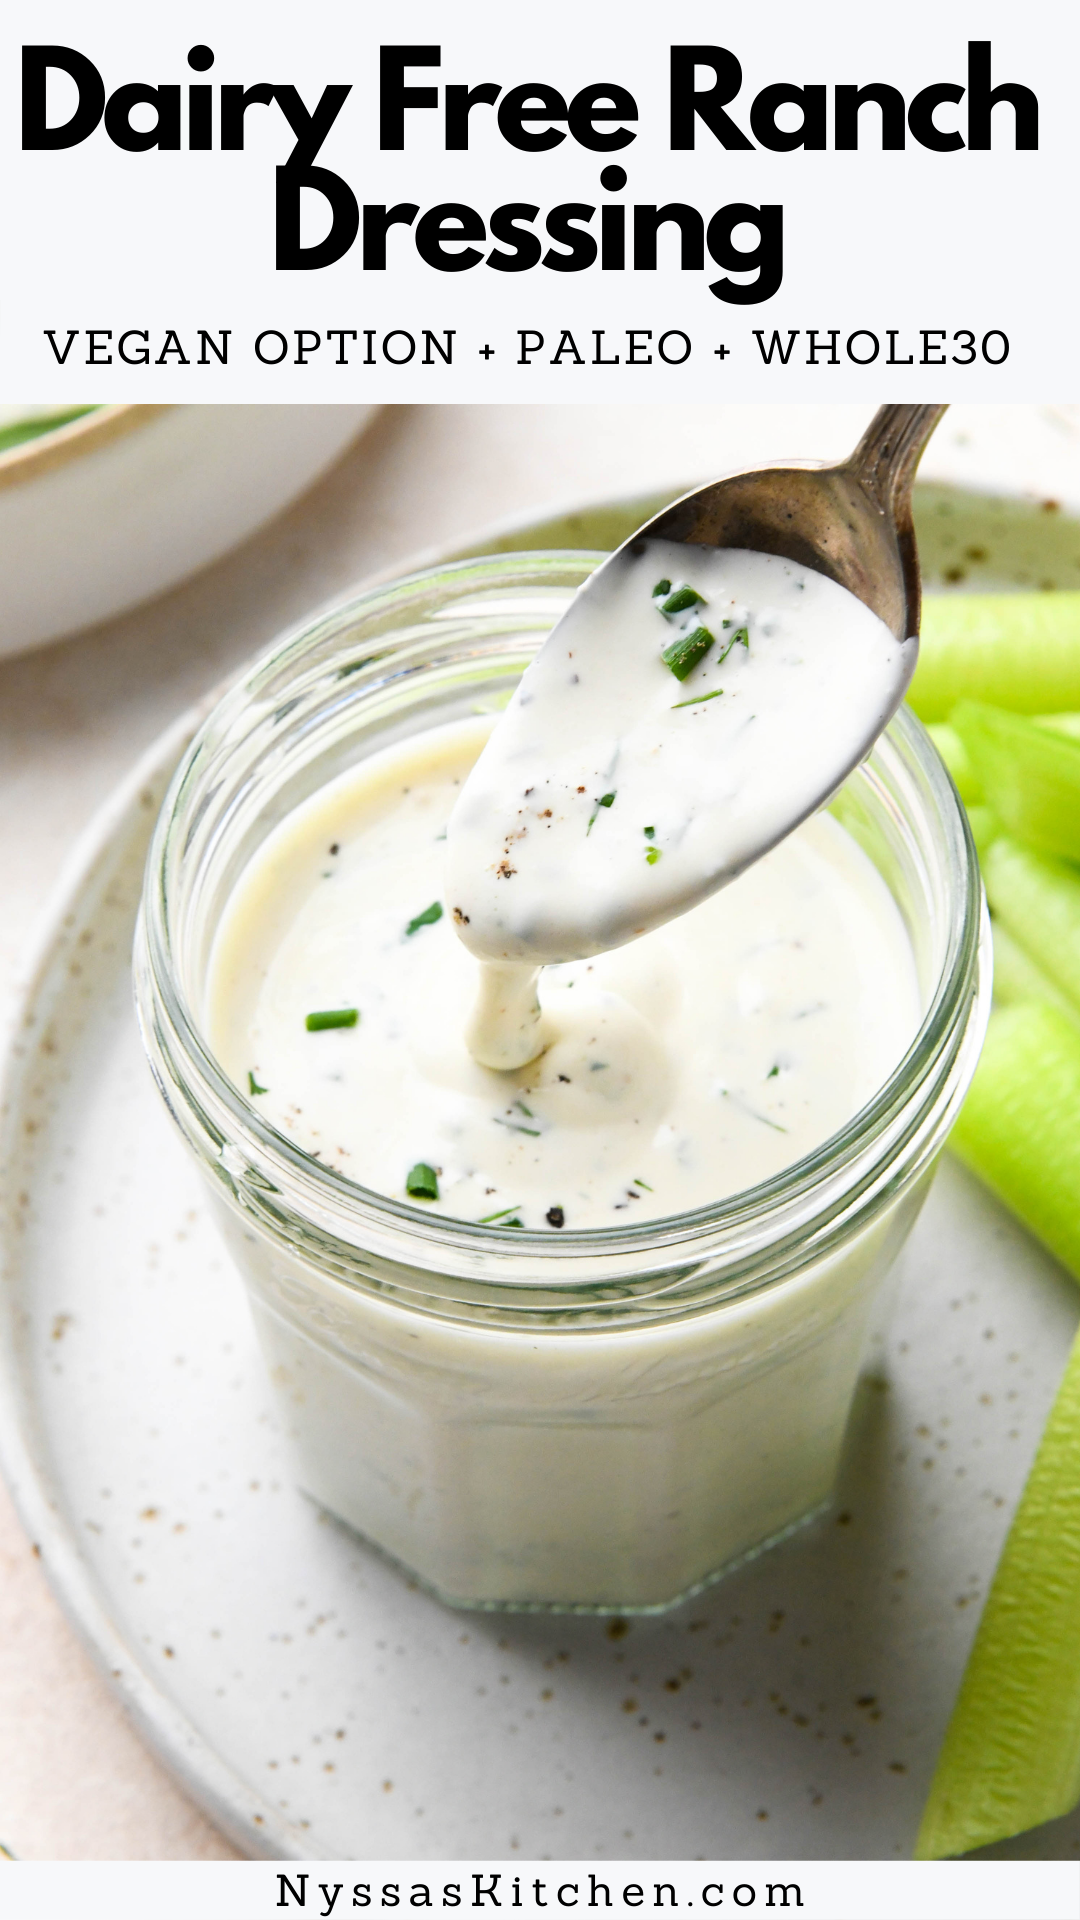 This dairy free ranch dressing is made with a few simple ingredients that you likely already have on hand. Made without milk or dairy and it's ready in less than 5 MINUTES! So delicious as a dip or a salad dressing. A healthy and tasty alternative to everyone's favorite sauce. Whole30, paleo, gluten free, dairy free, vegan option, keto, low carb.